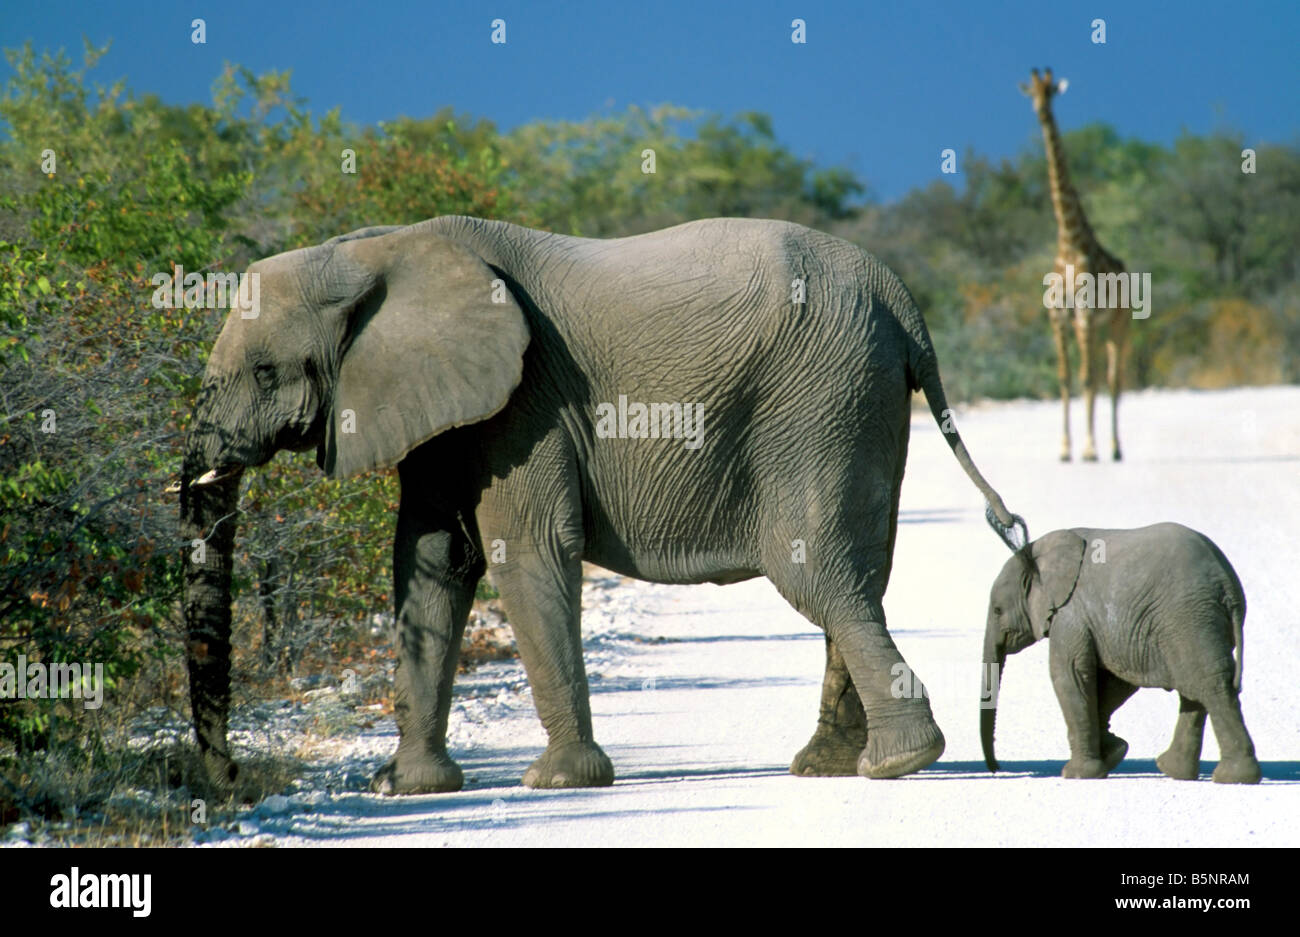 A mother and baby elephant (loxodonta africana) crossing the road watched by a giraffe (giraffa camelopardalis). Stock Photo